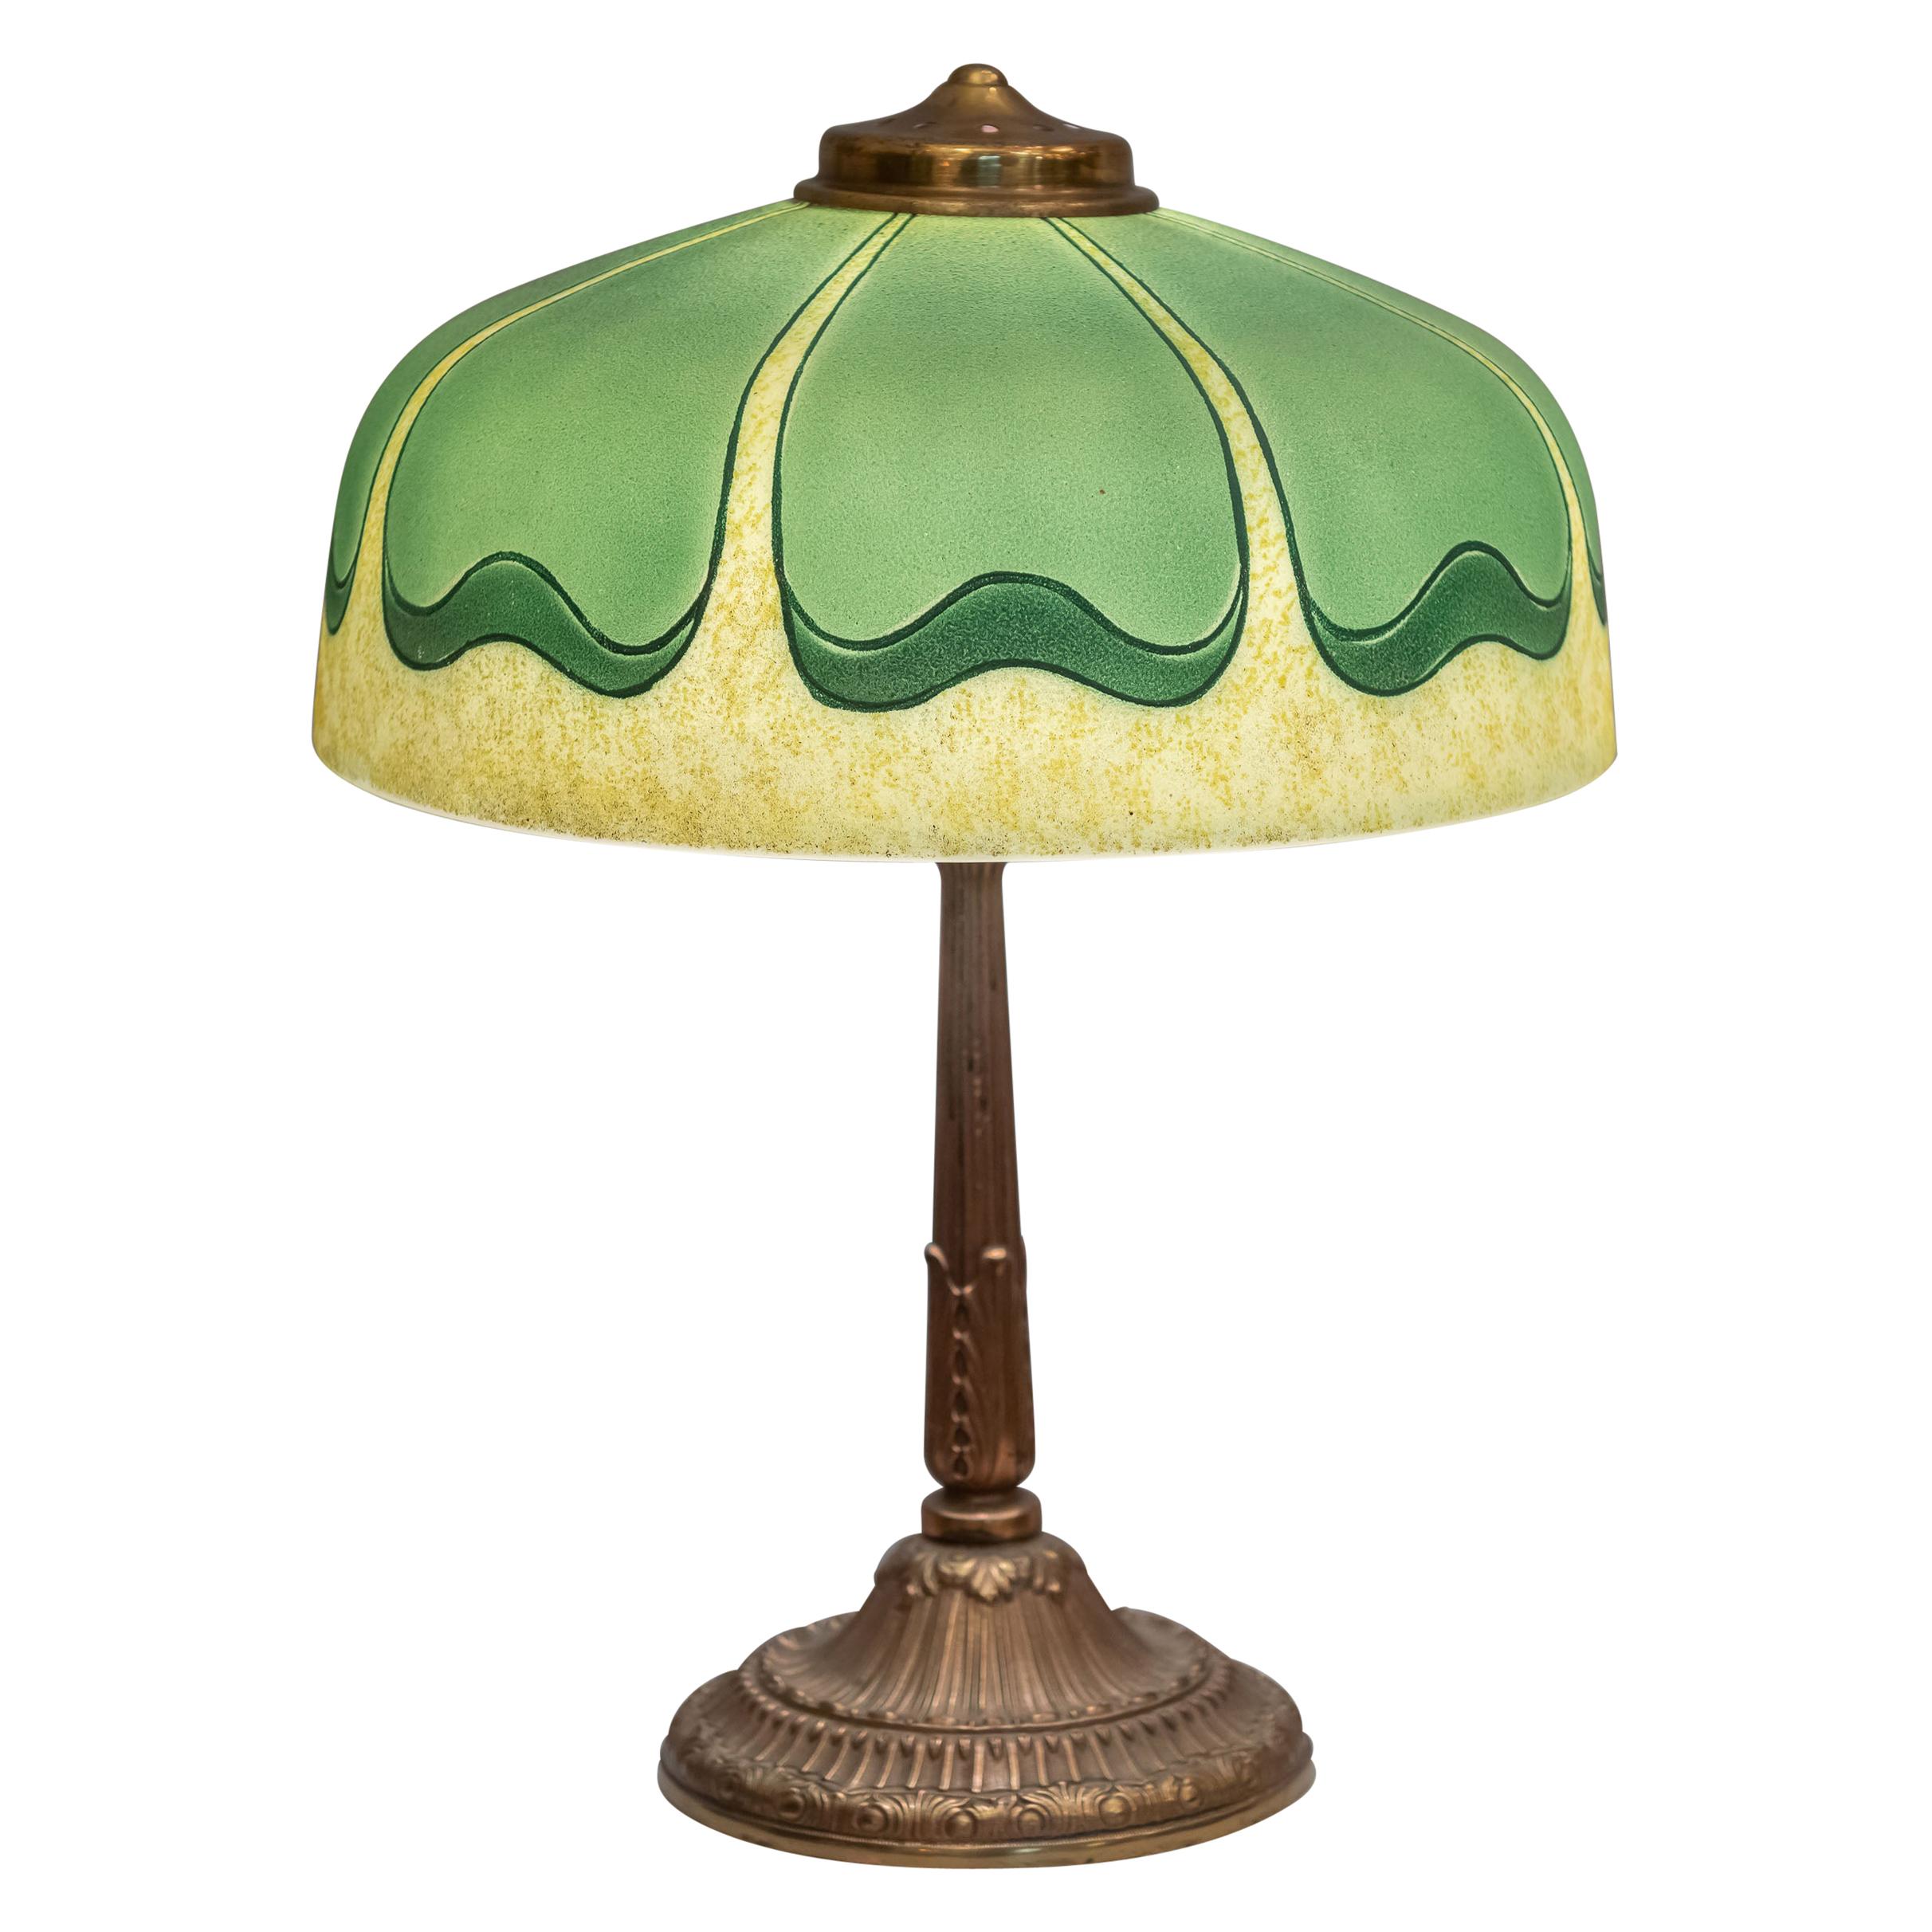 Reverse/Obverse Painted Lamp, Signed Pittsburgh, circa 1920